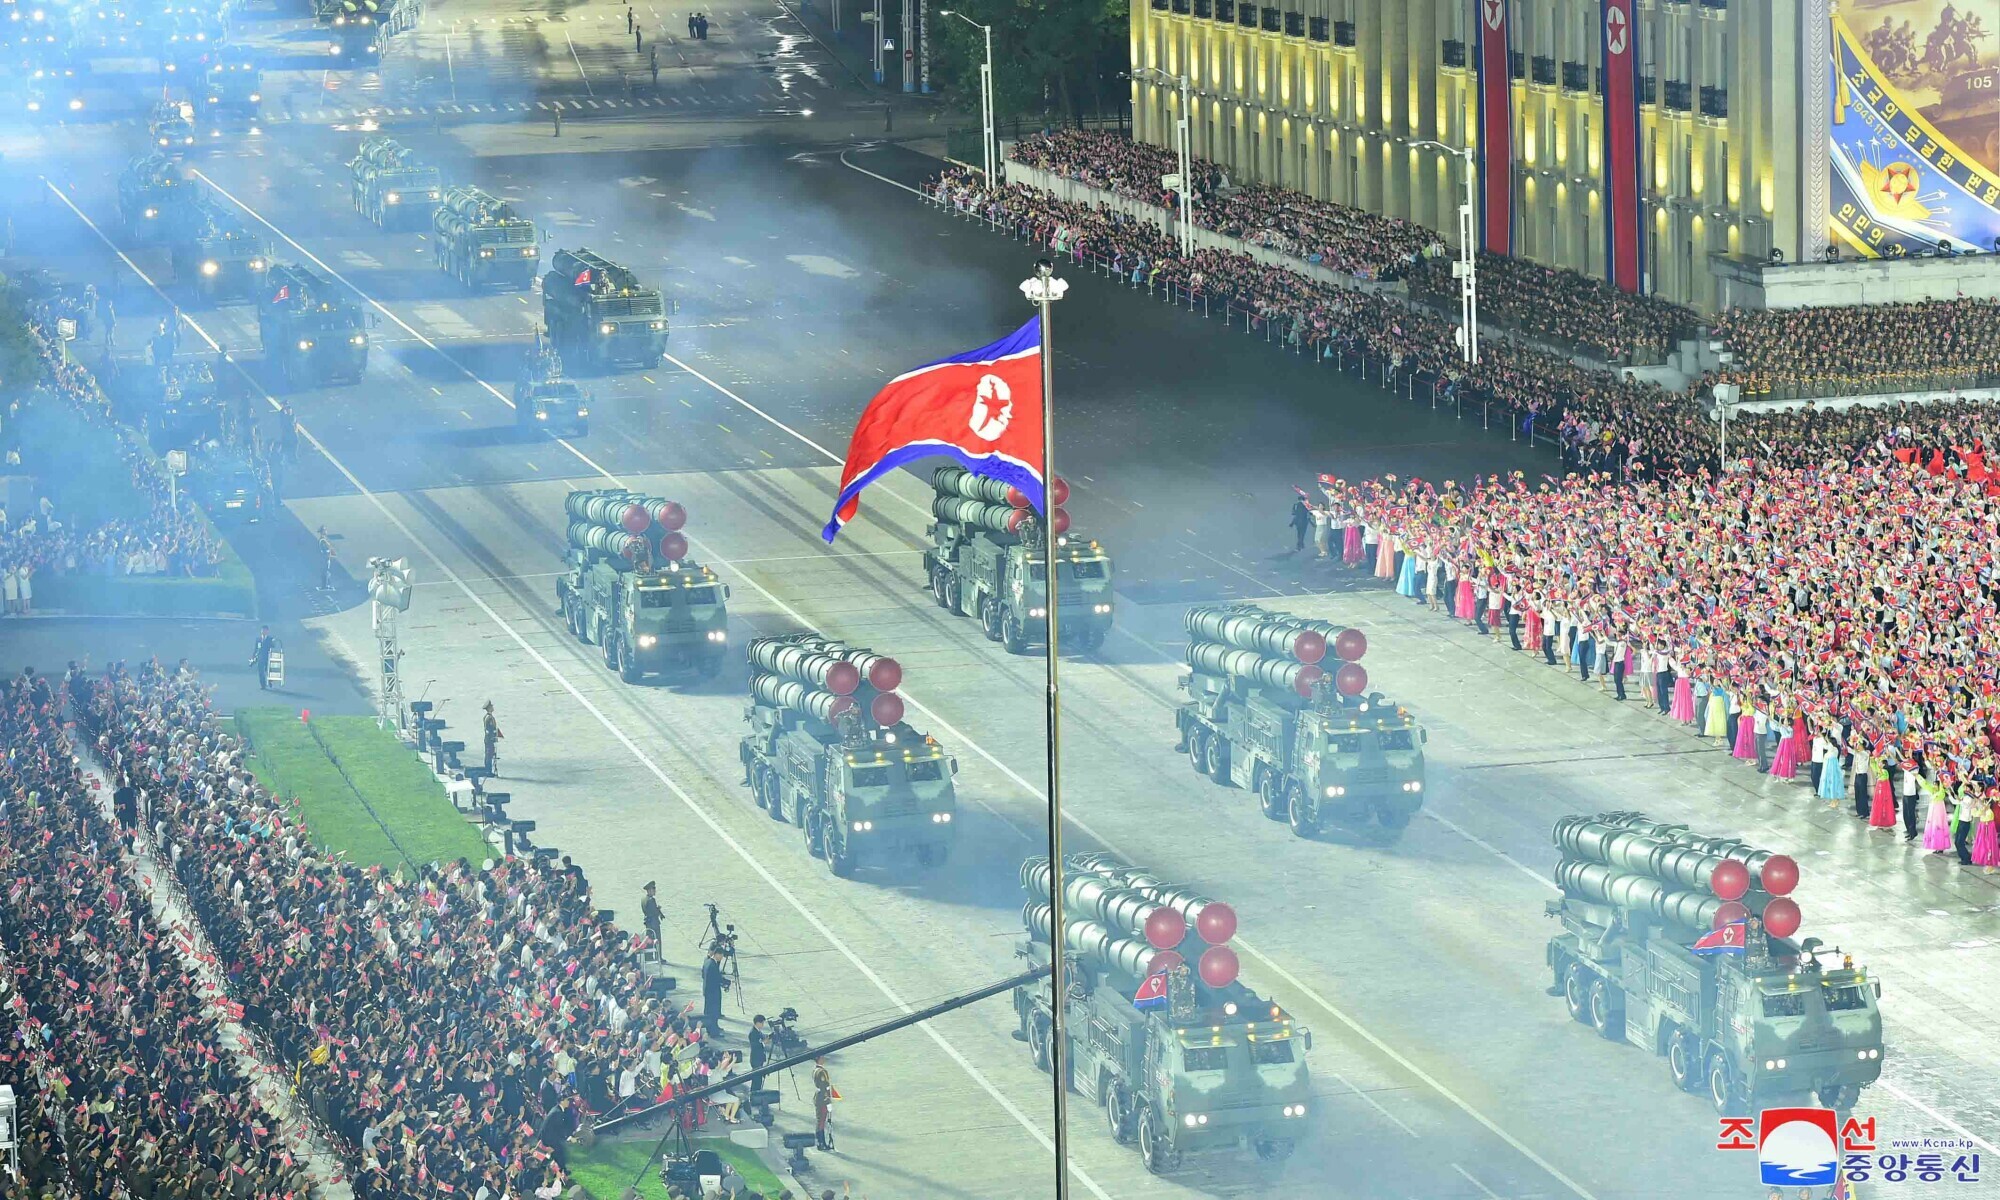 Kim Kim oversees North Korea military parade showcasing new drones, ICBMs . Kim oversees